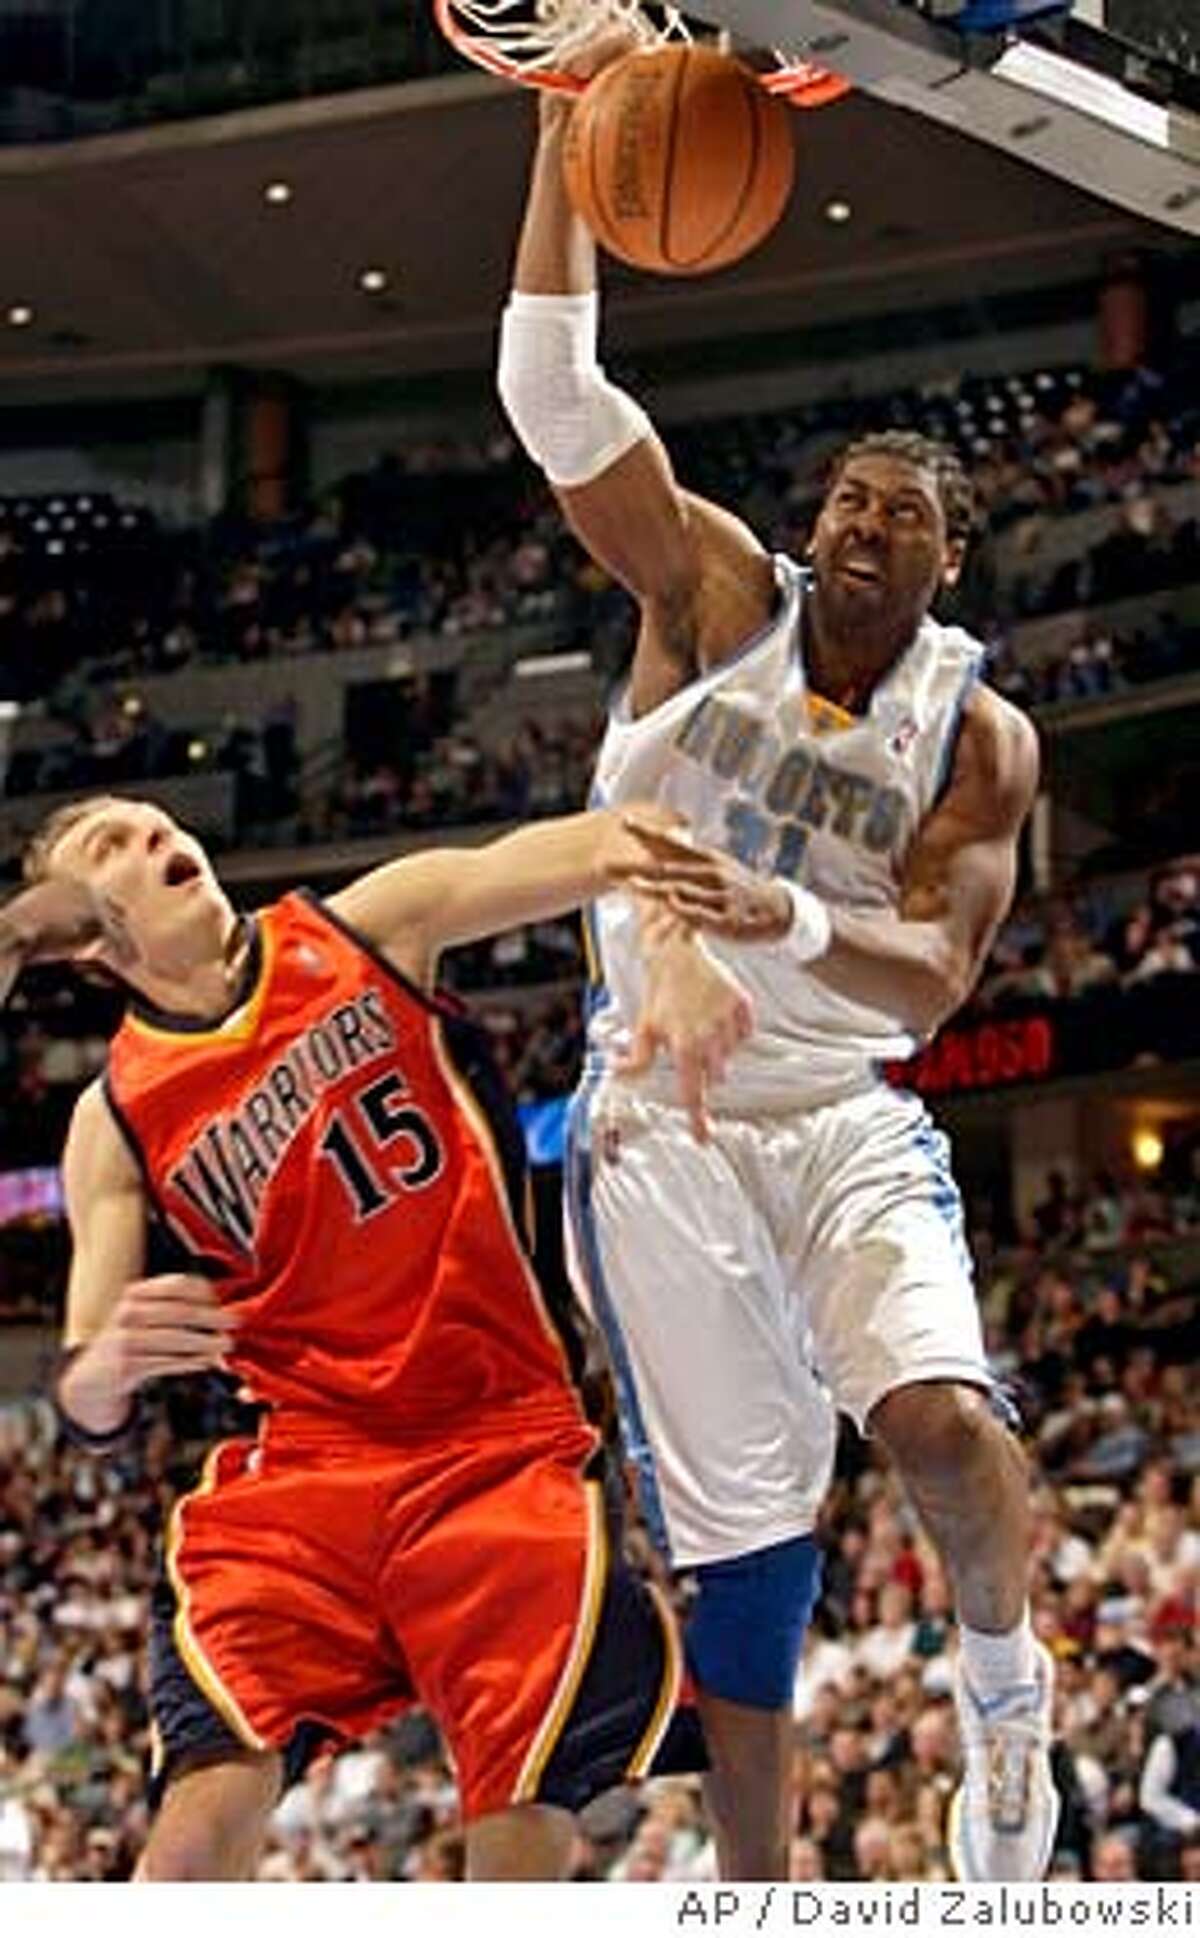 Denver Nuggets forward Nene, right, of Brazil, dunks the ball for a basket over Golden State Warriors center Andris Biedrins, of Latvia, in the third quarter of the Nuggets' 123-111 victory in an NBA basketball game in Denver on Monday, Feb. 12, 2007. (AP Photo/David Zalubowski)